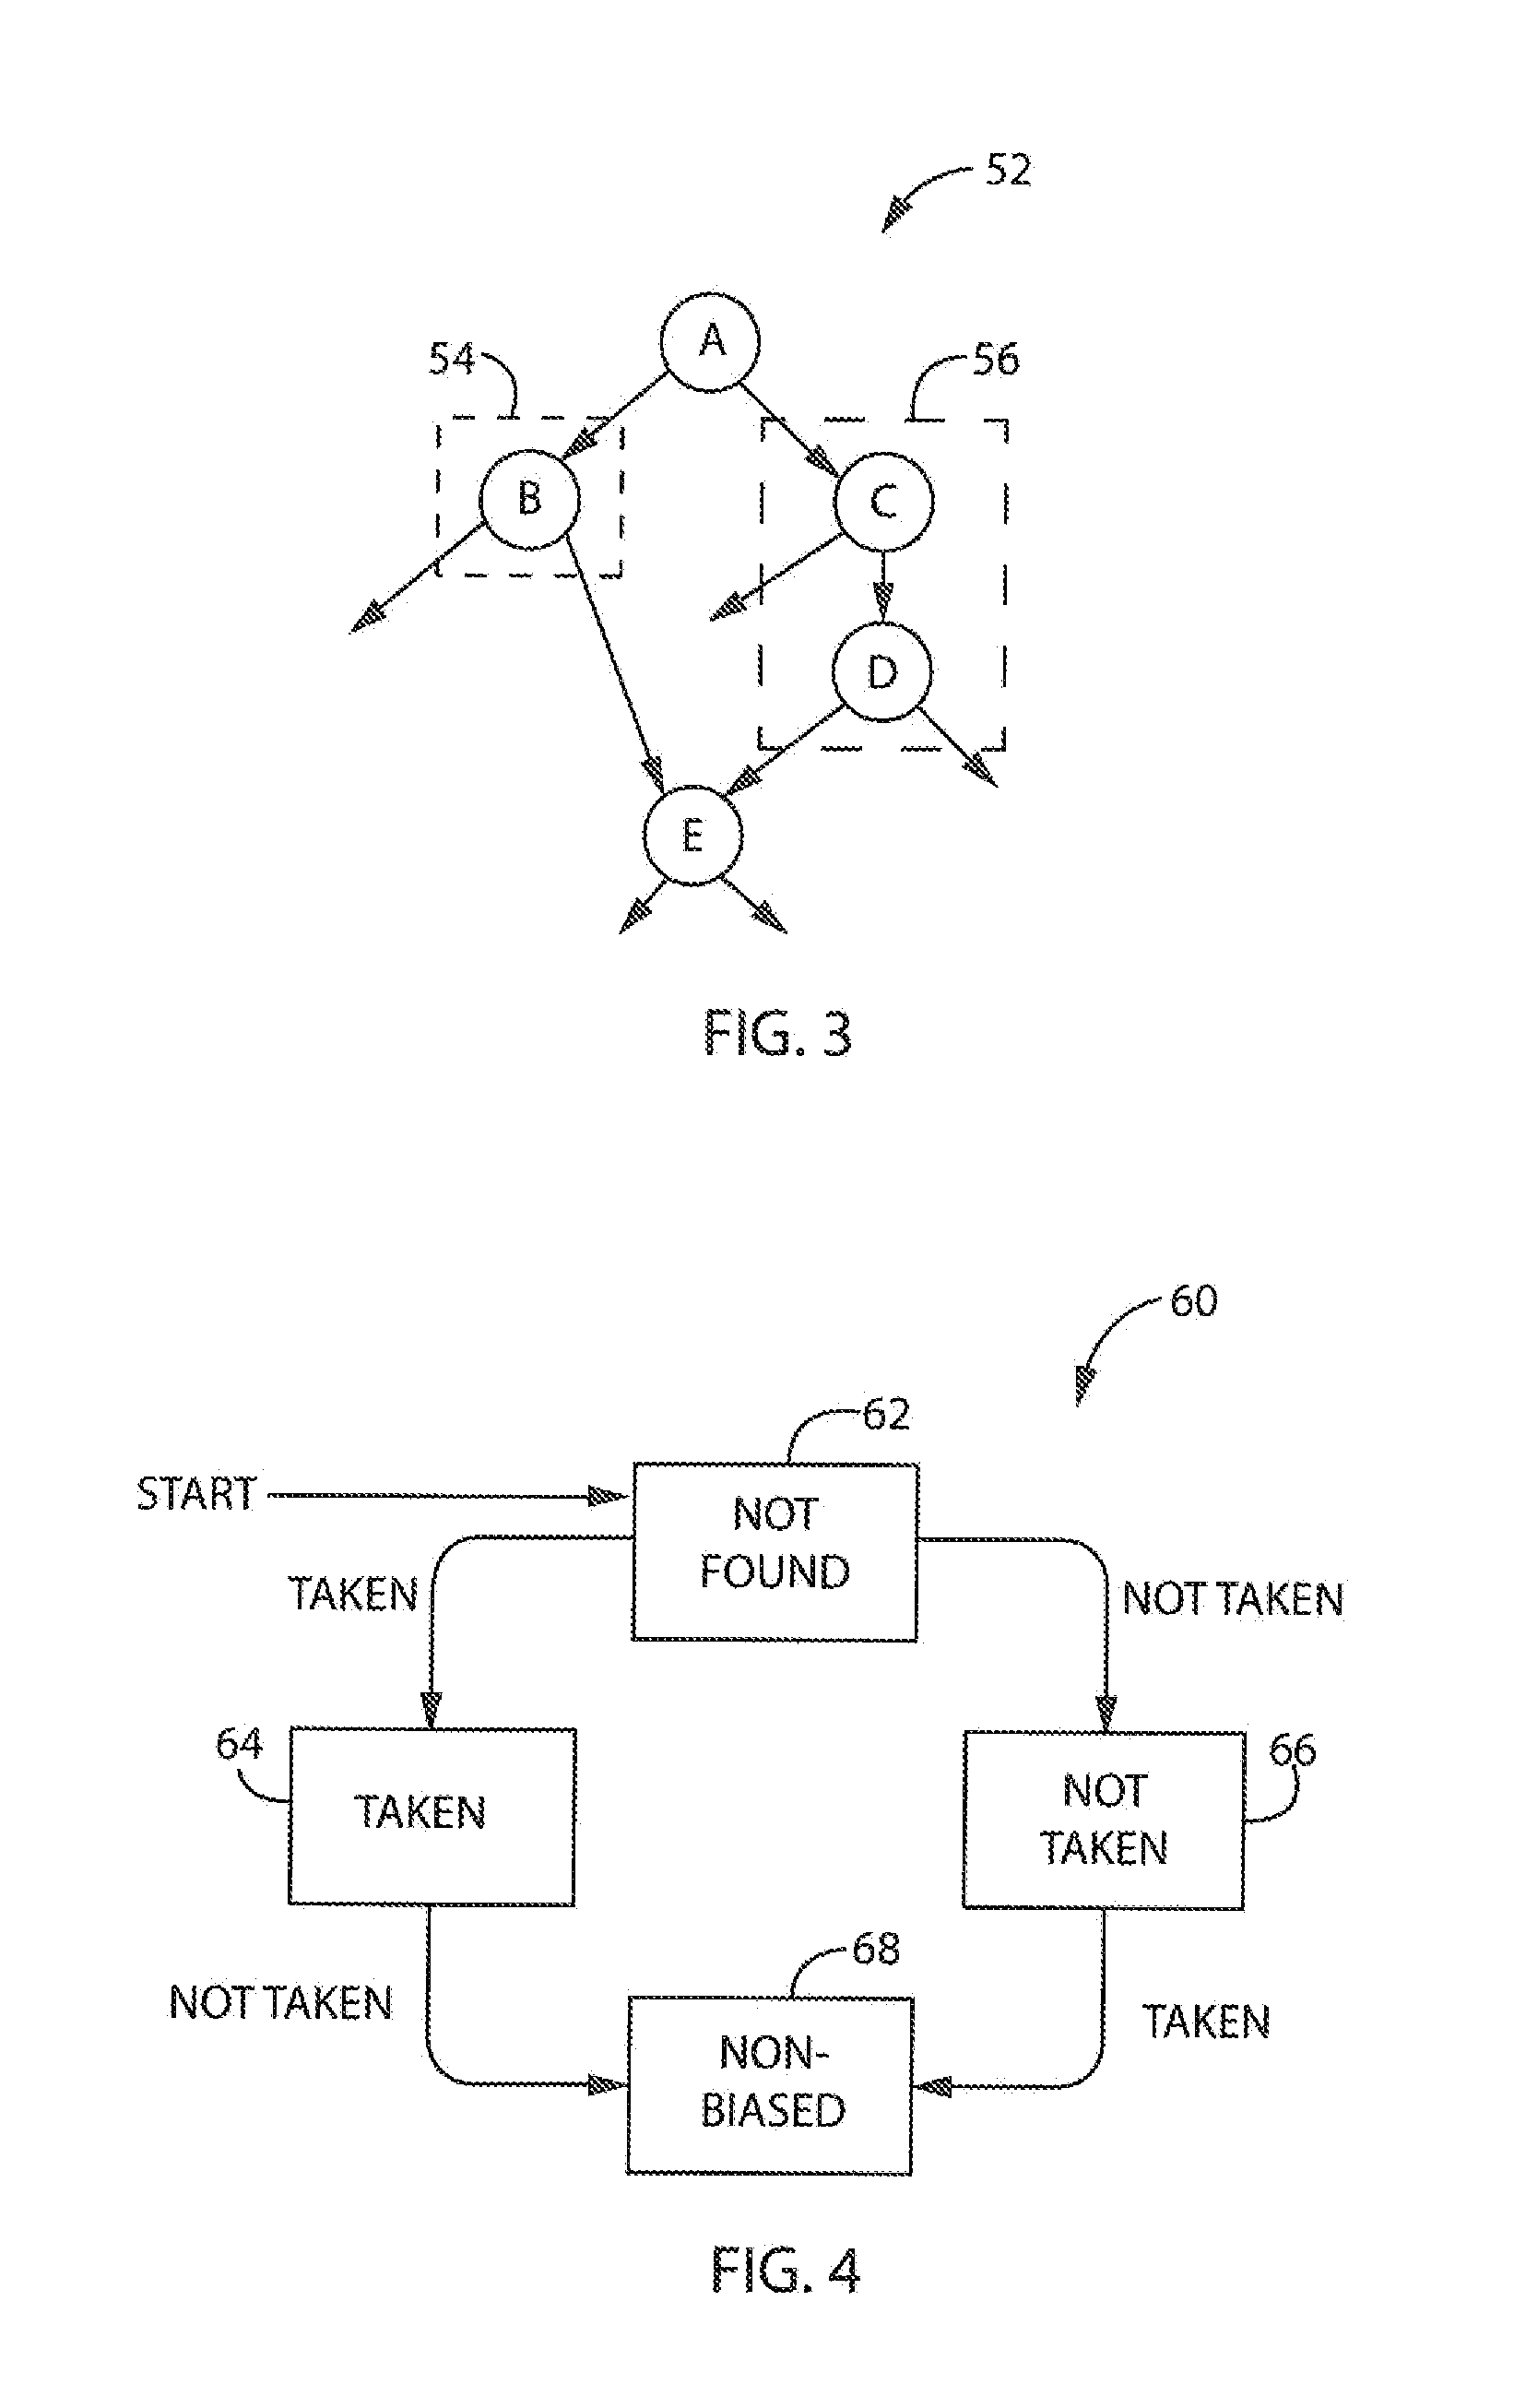 Apparatus and Method for Bias-Free Branch Prediction